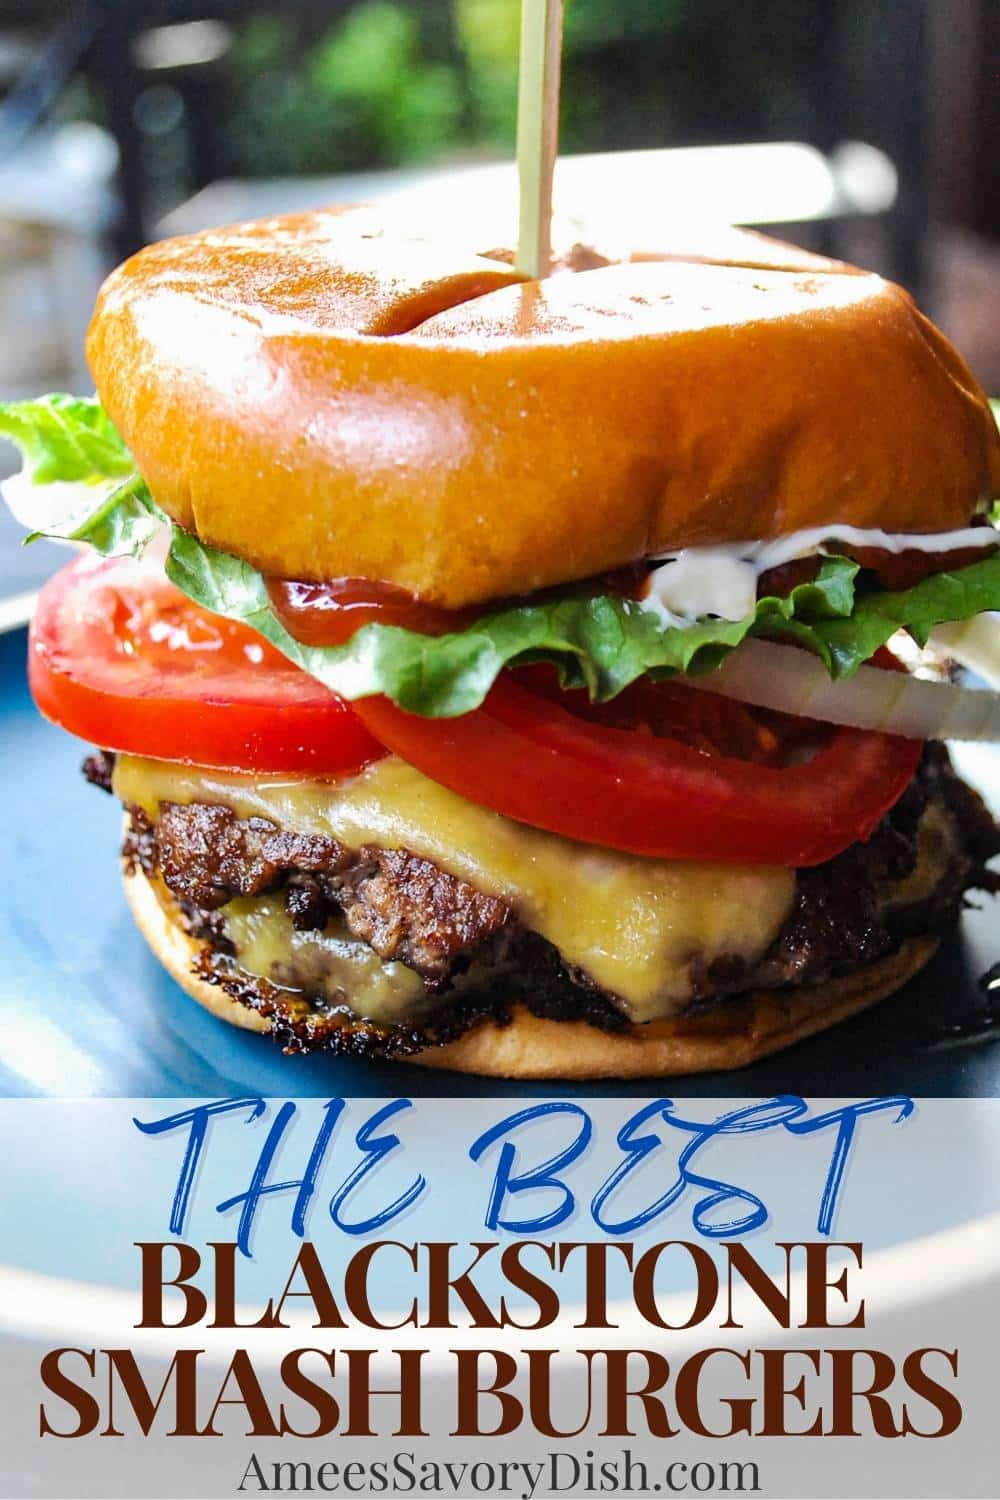 Make your favorite flavorful thin and juicy burgers on a flat top grill with this easy Blackstone smash burgers recipe! via @Ameessavorydish